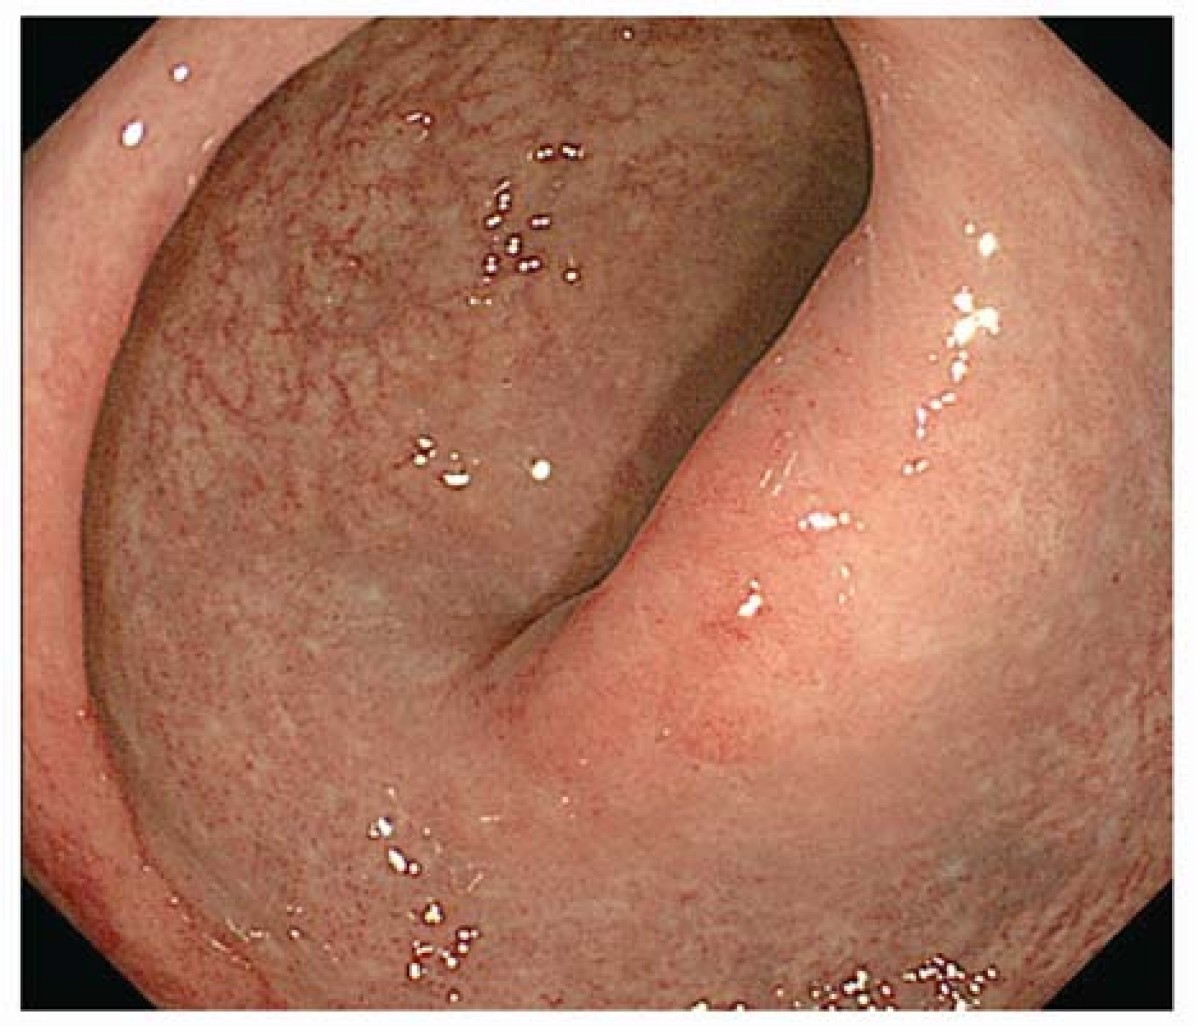 Rectal Mucosal Prolapse Syndrome As An Unusual